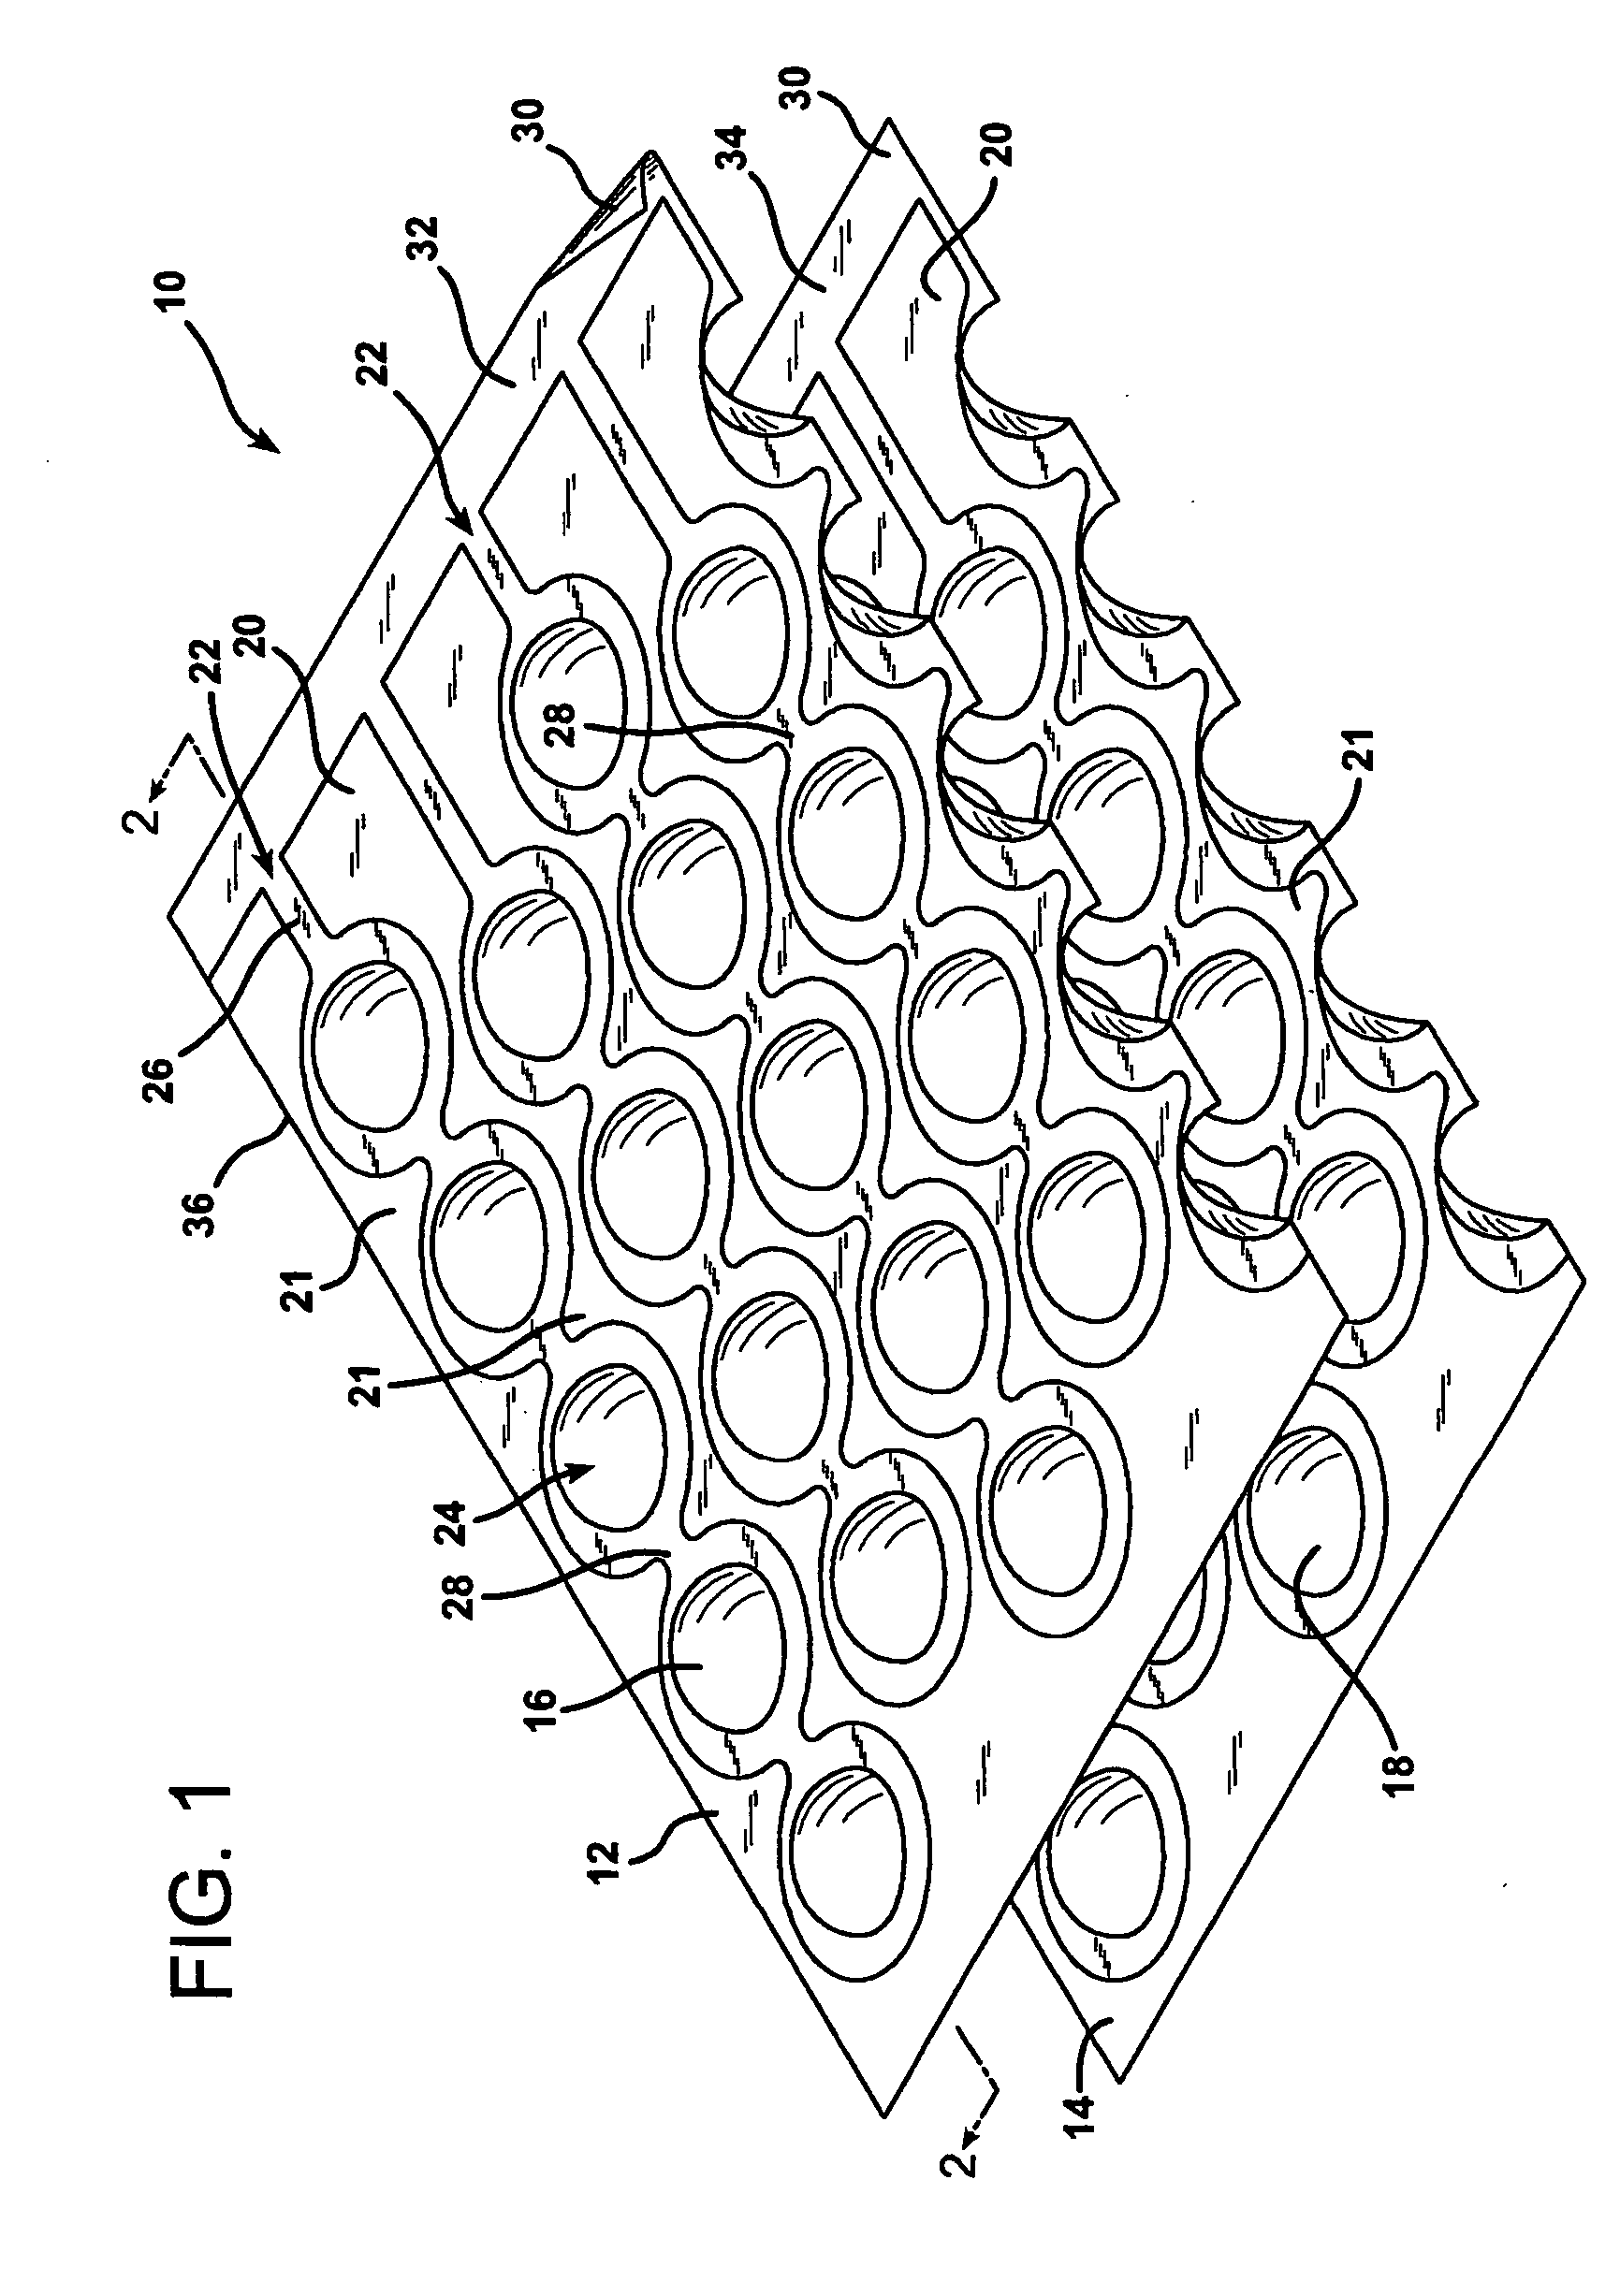 Formed inflatable cellular cushioning article and method of making same